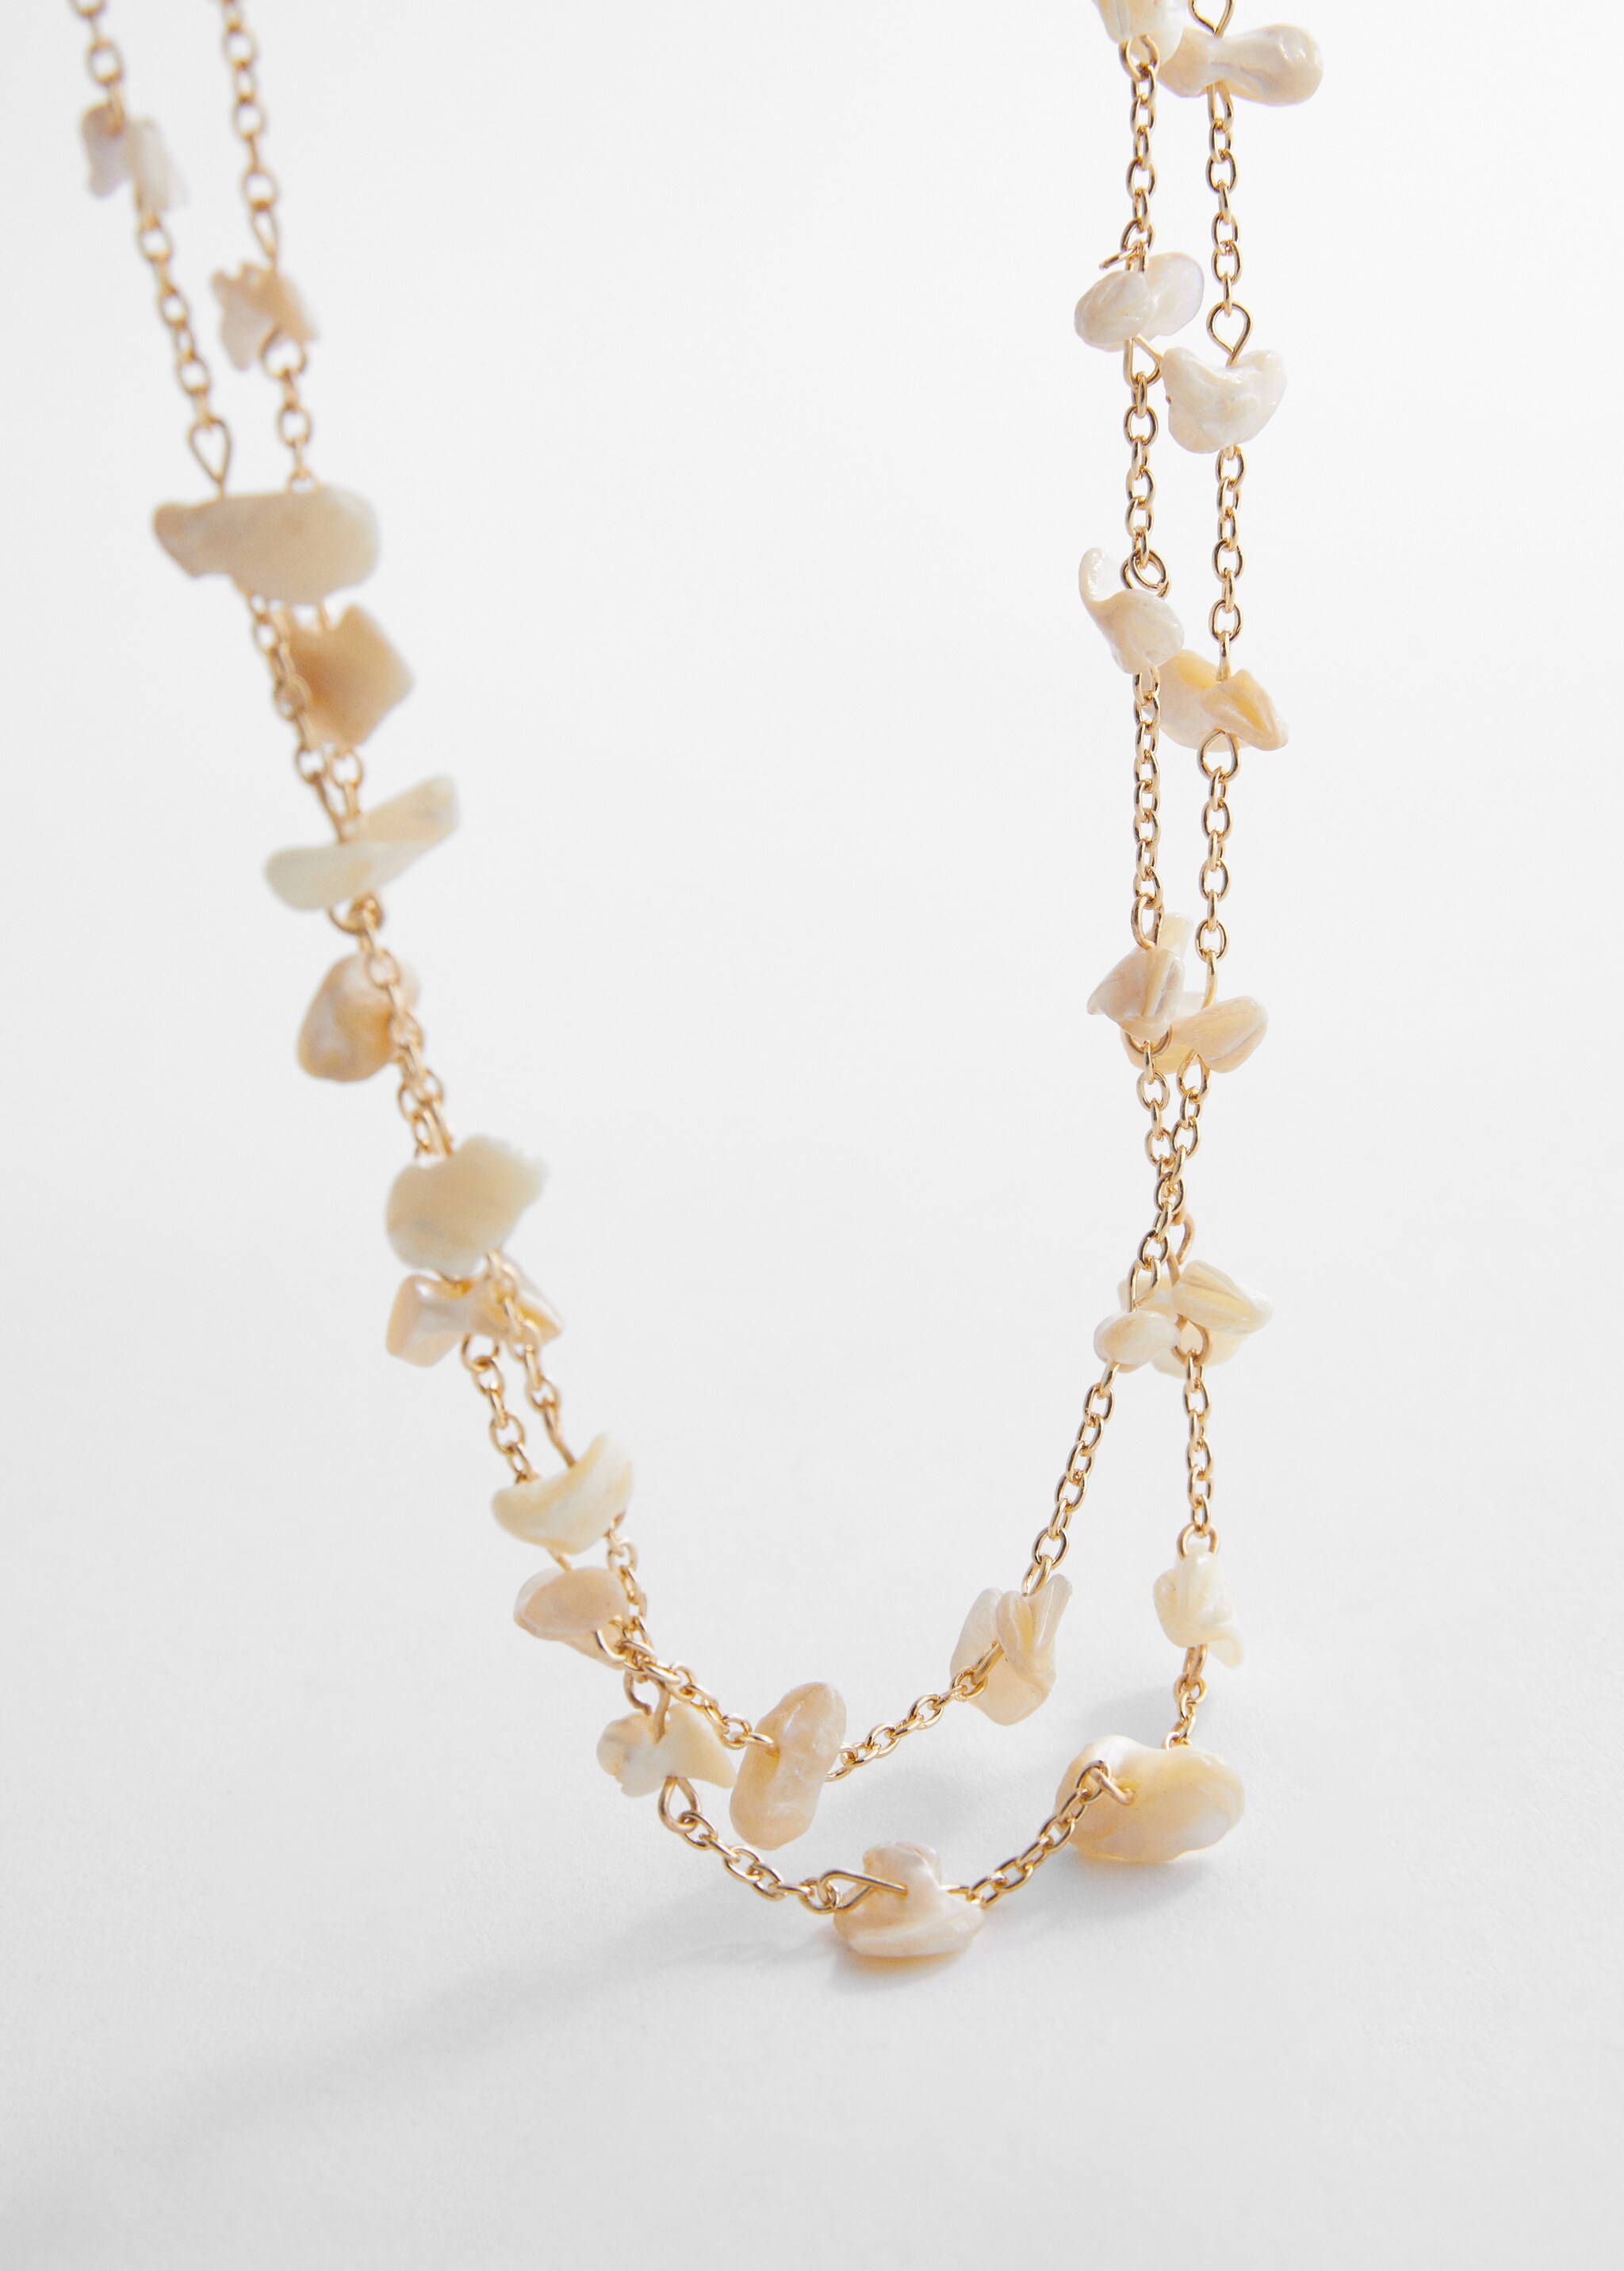 Mother-of-pearl beads necklace - Medium plane